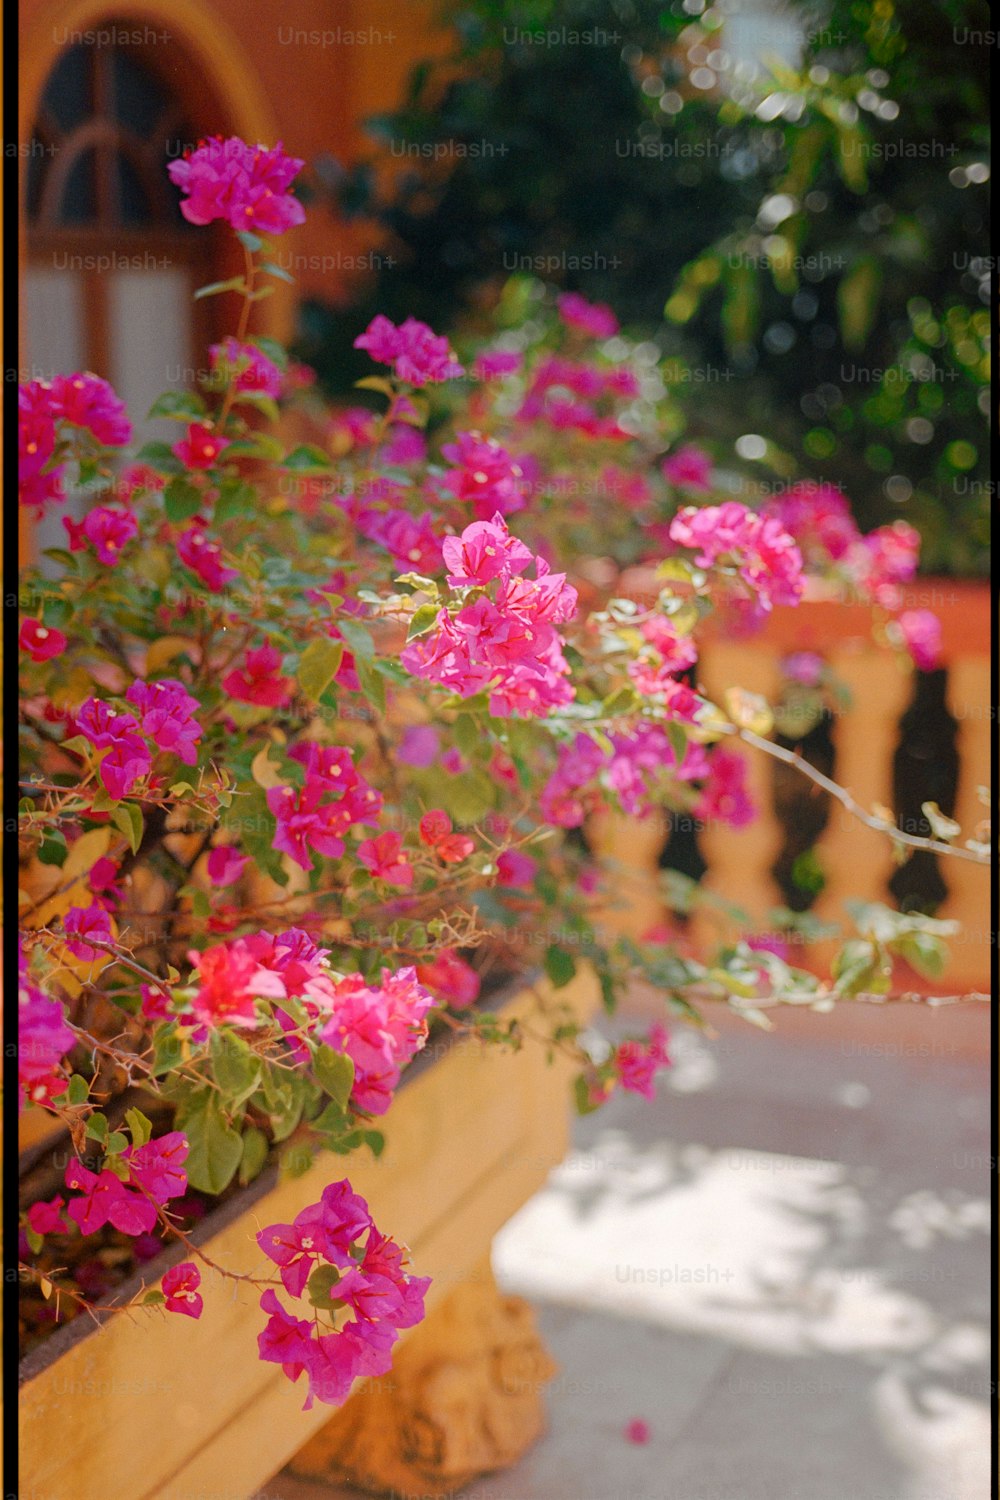 a planter filled with pink flowers next to a wooden fence